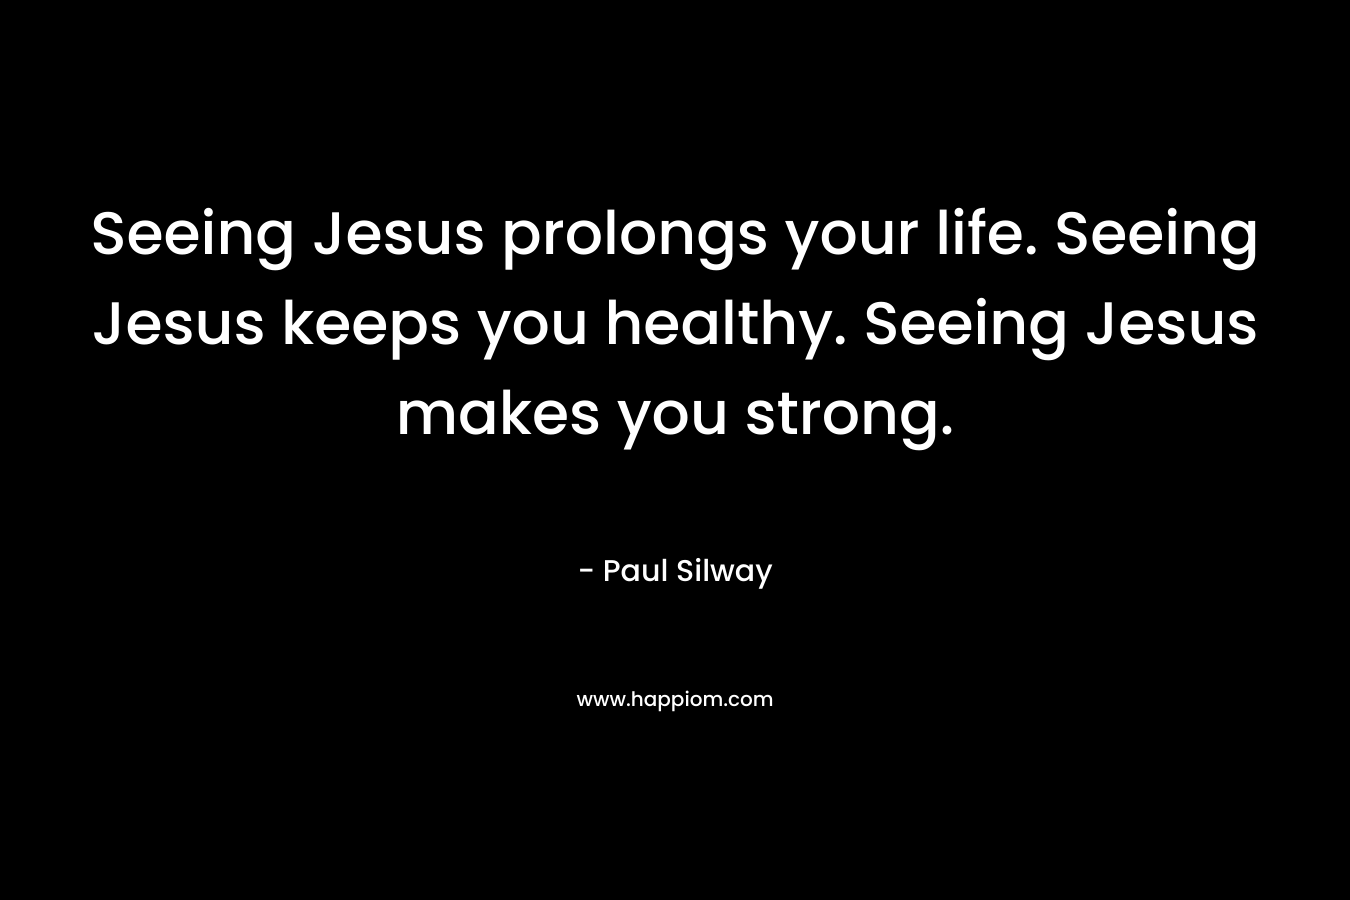 Seeing Jesus prolongs your life. Seeing Jesus keeps you healthy. Seeing Jesus makes you strong.